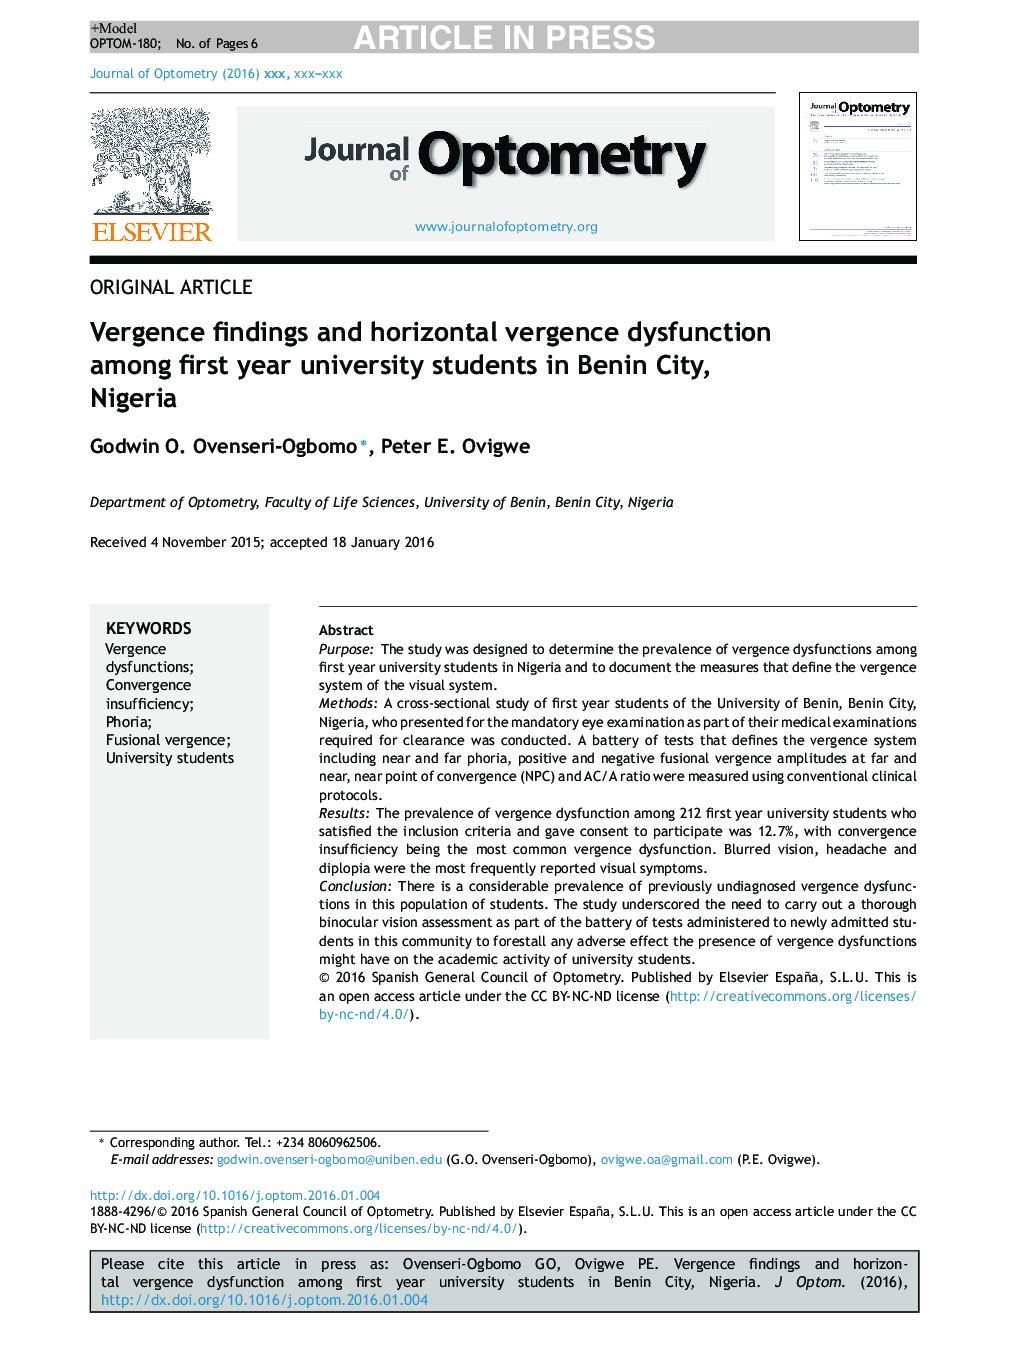 Vergence findings and horizontal vergence dysfunction among first year university students in Benin City, Nigeria